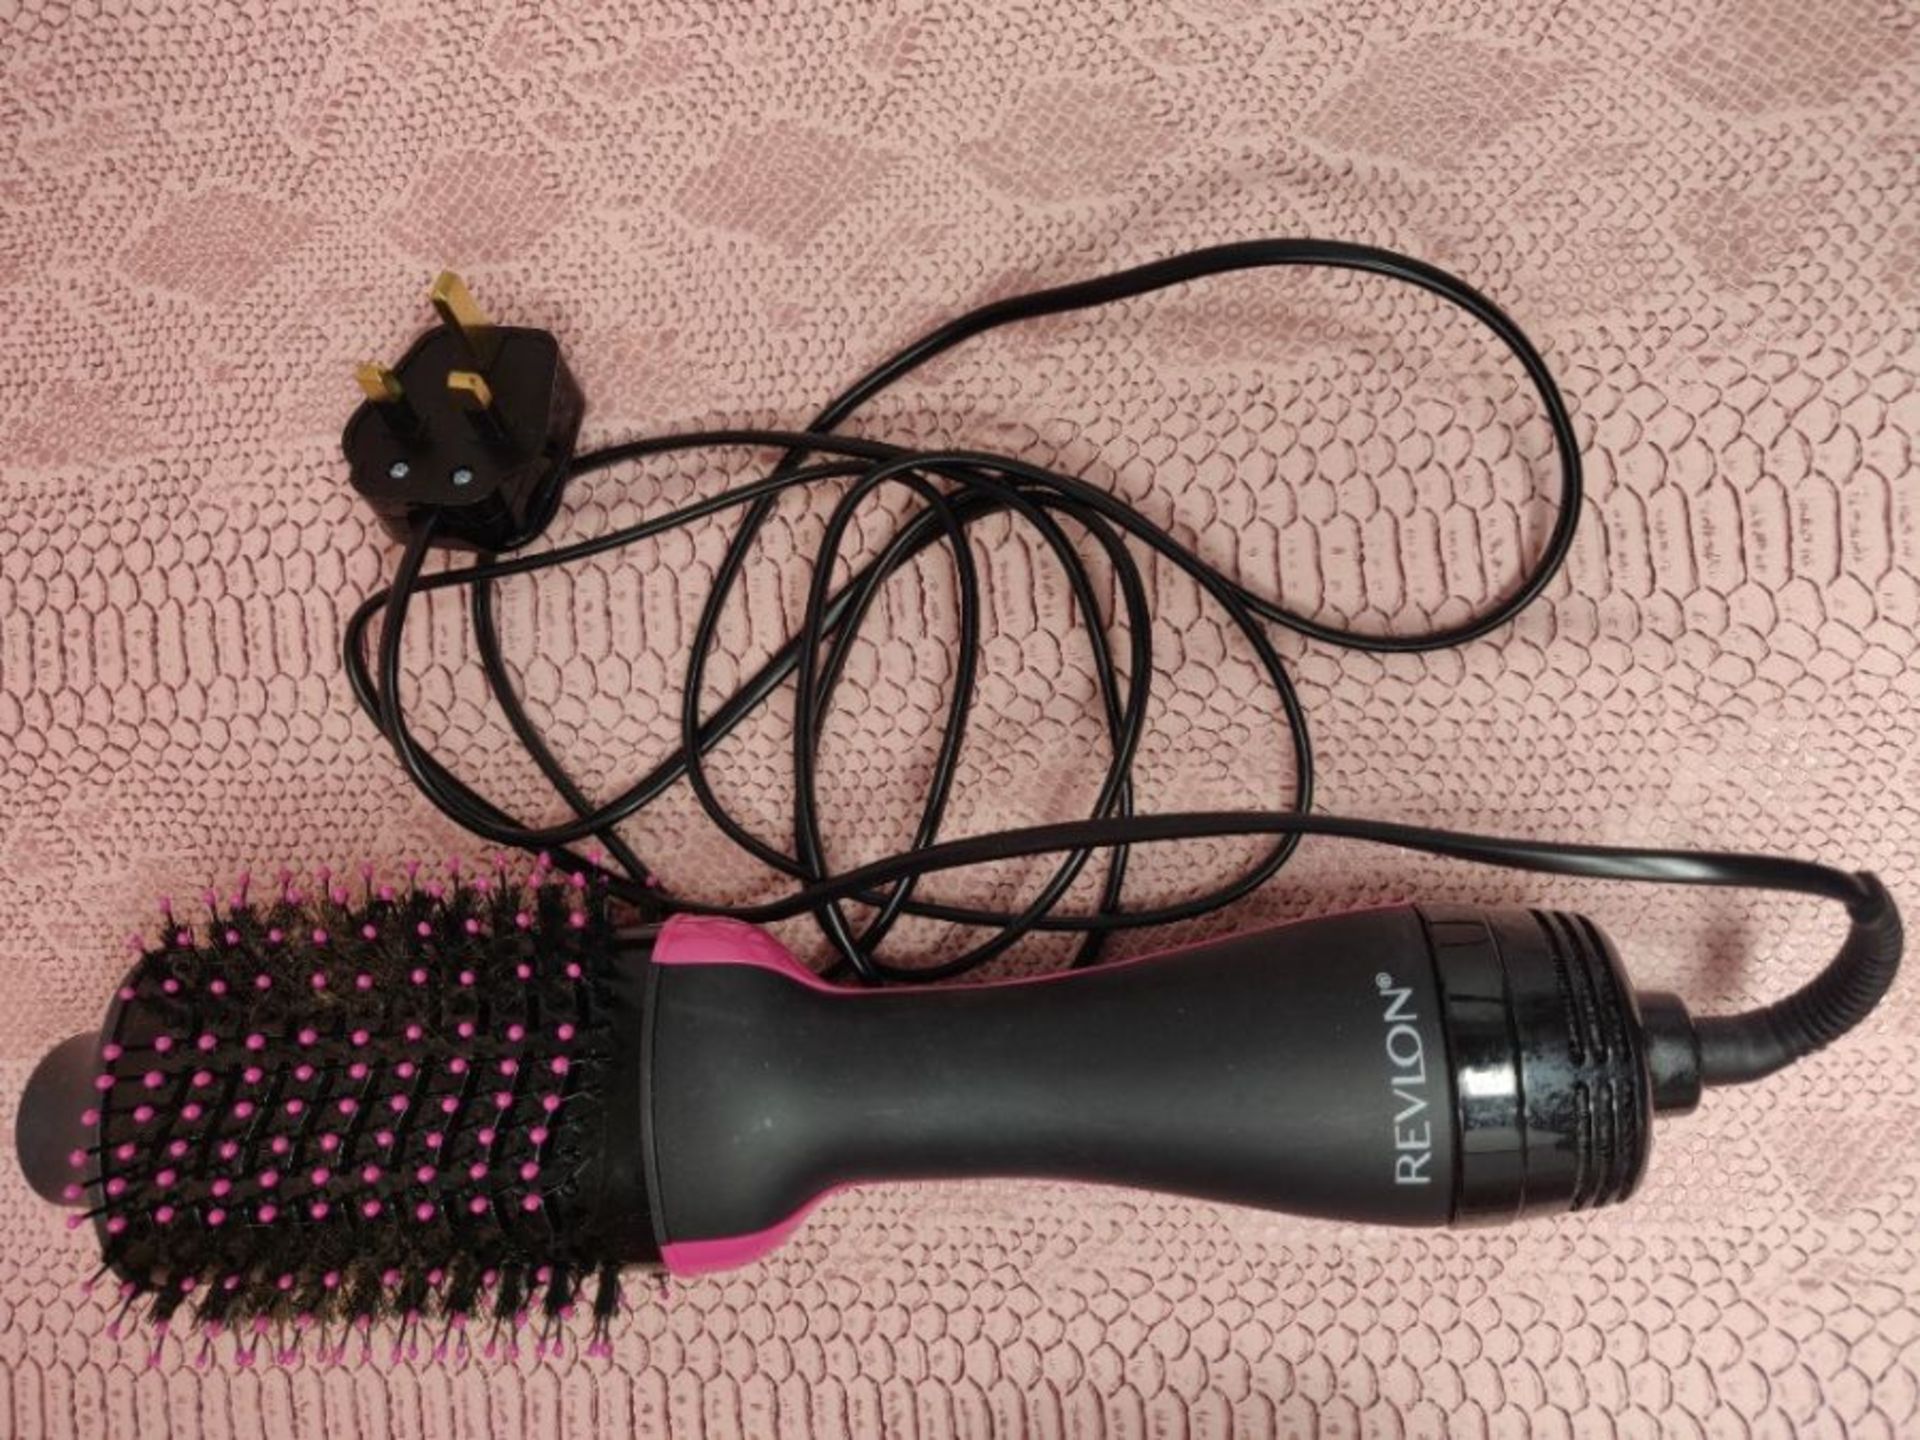 Revlon Salon One- Step Volumizer for mid to long hair (2-in-1 styling tool, dryer and - Image 3 of 3